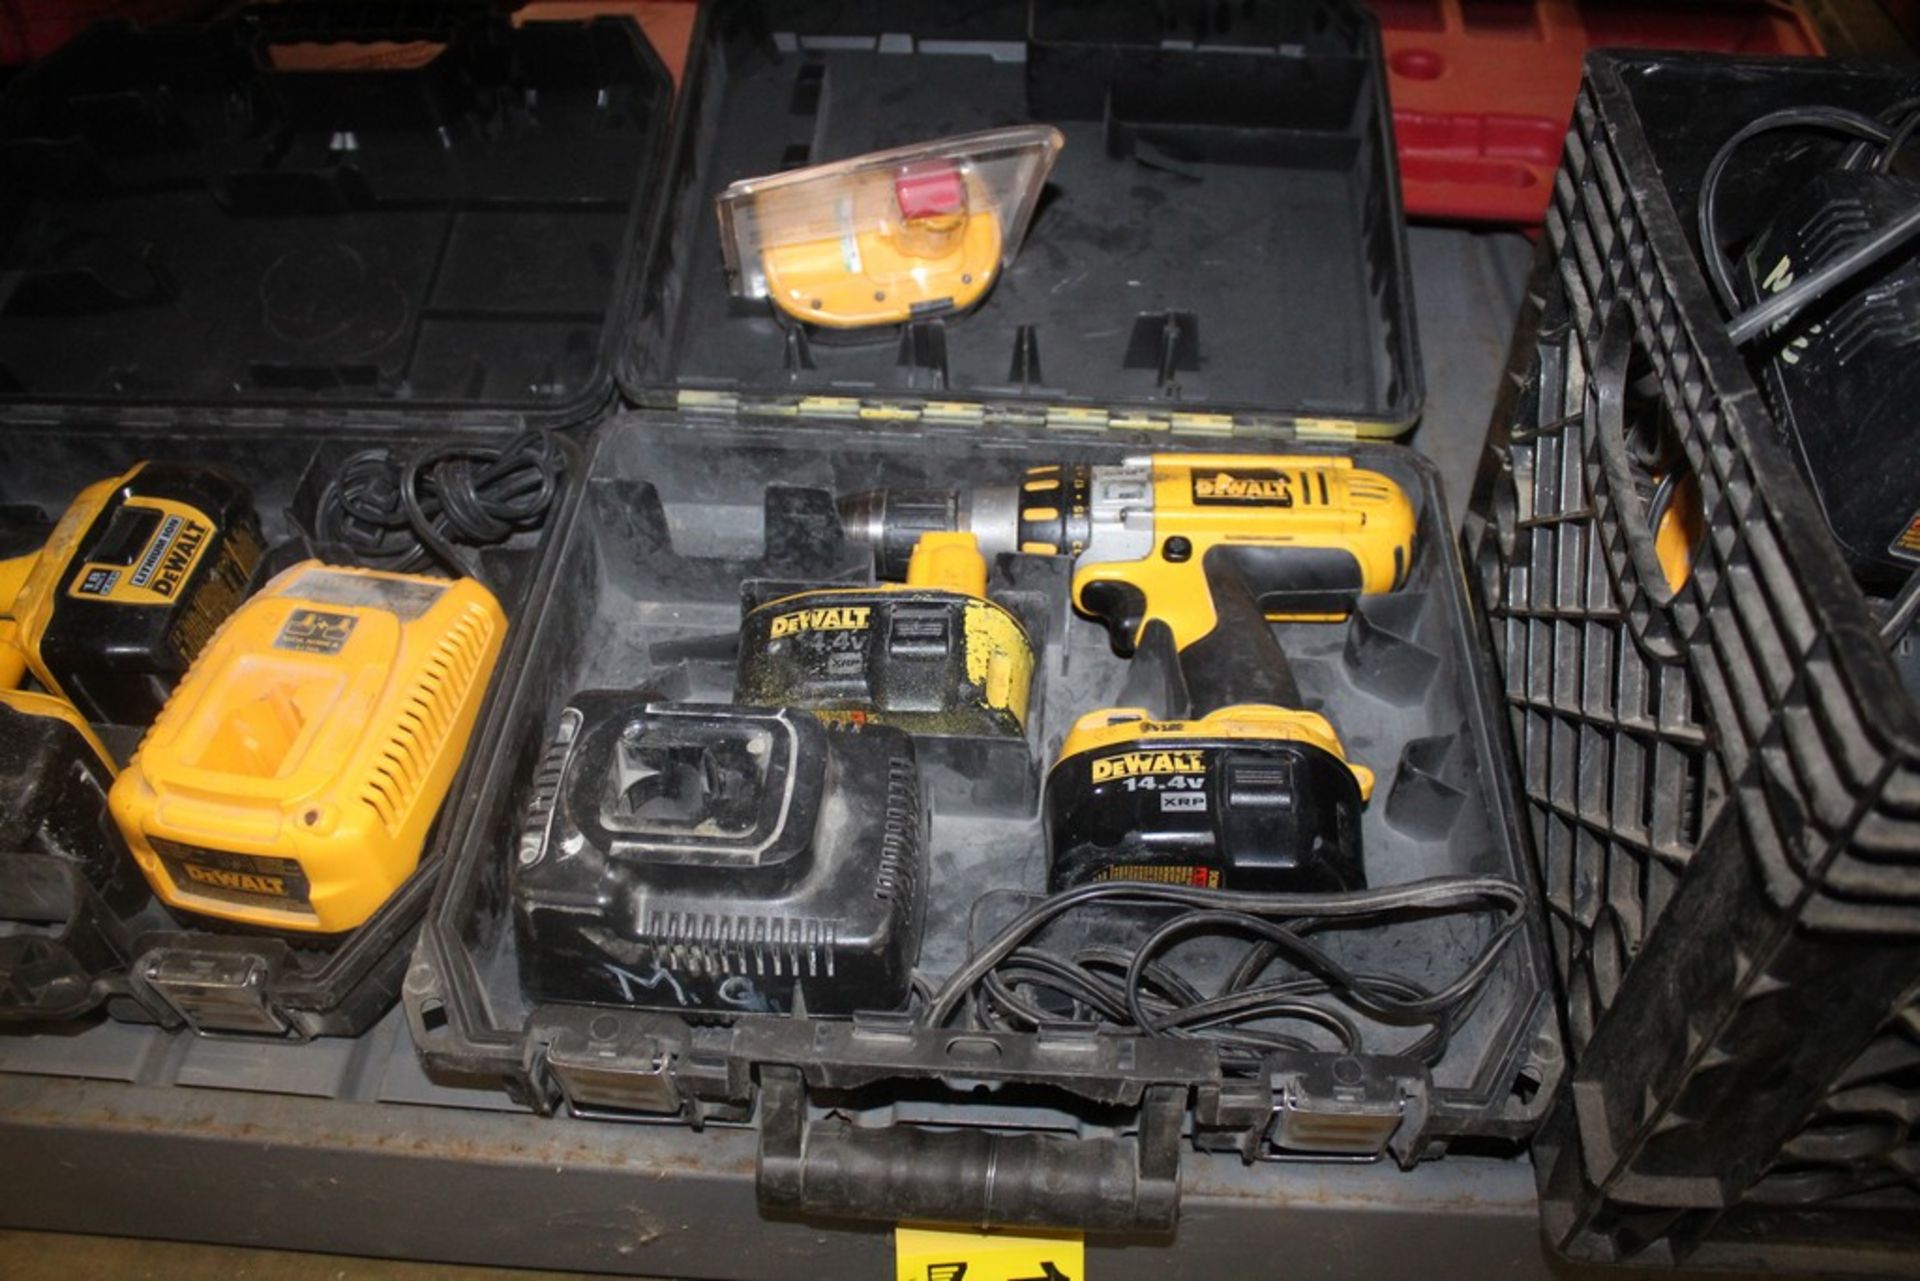 DEWALT MODEL DC935 1/2" 14.4-VOLT CORDLESS HAMMER DRILL WITH CASE, SPARE BATTERY, CHARGER